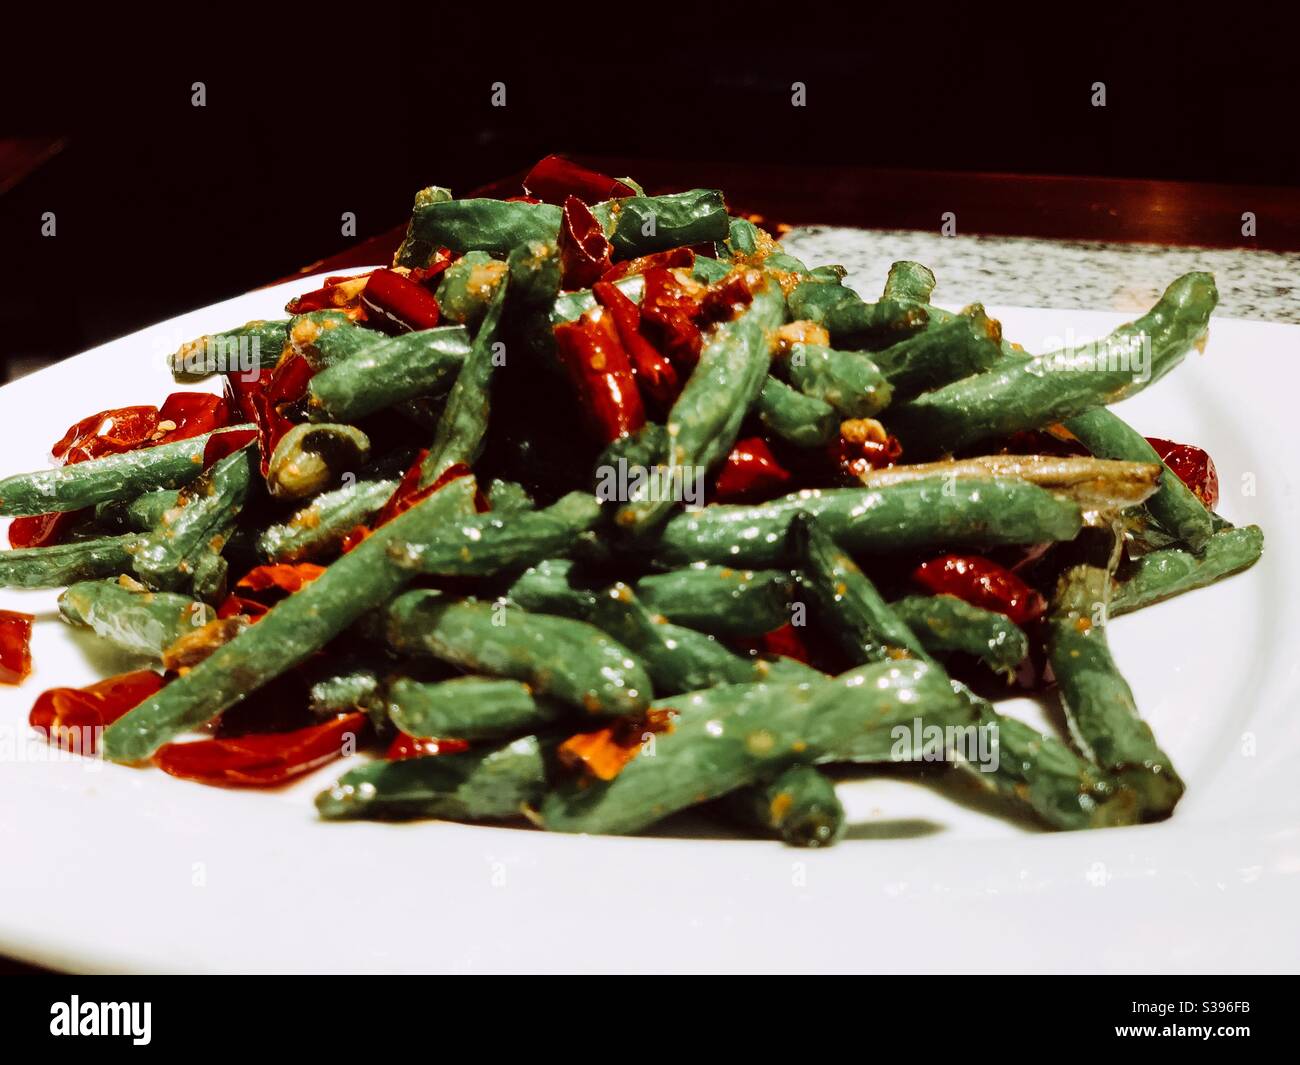 Stirred fried green beans Stock Photo